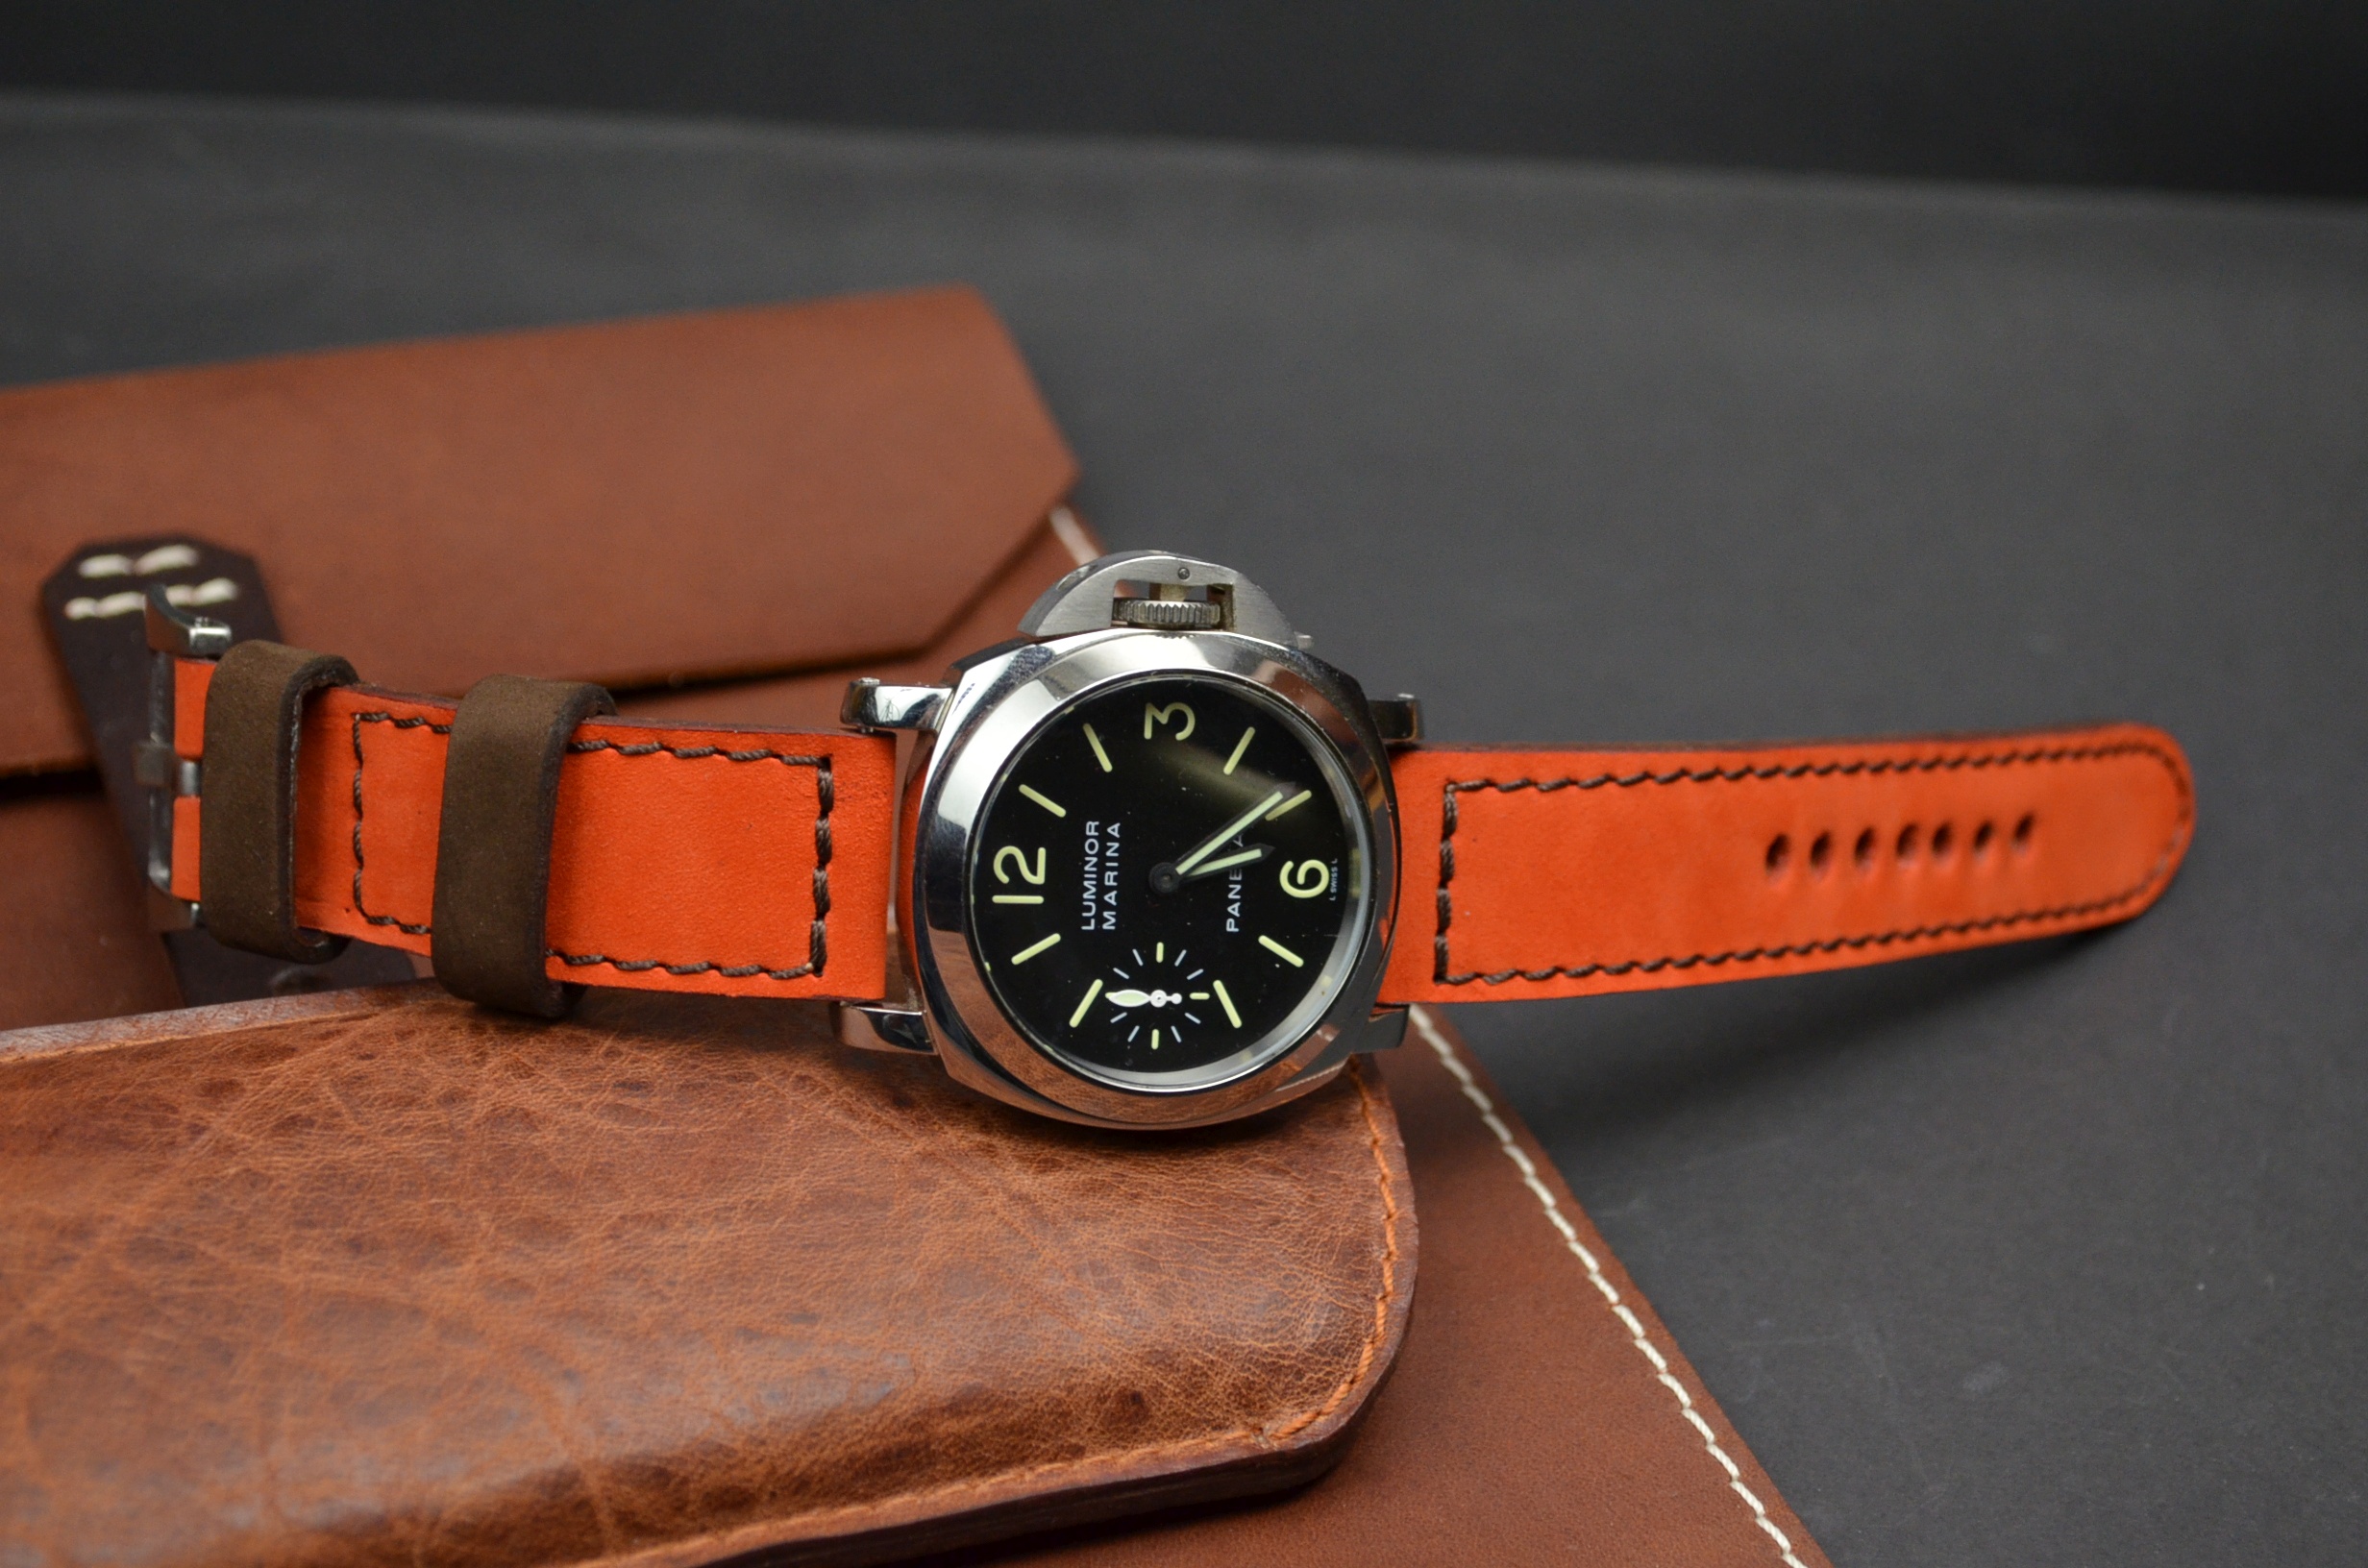 ORANGE BROWN is one of our hand crafted watch straps. Available in orange brown color, 3.5 - 4 mm thick.